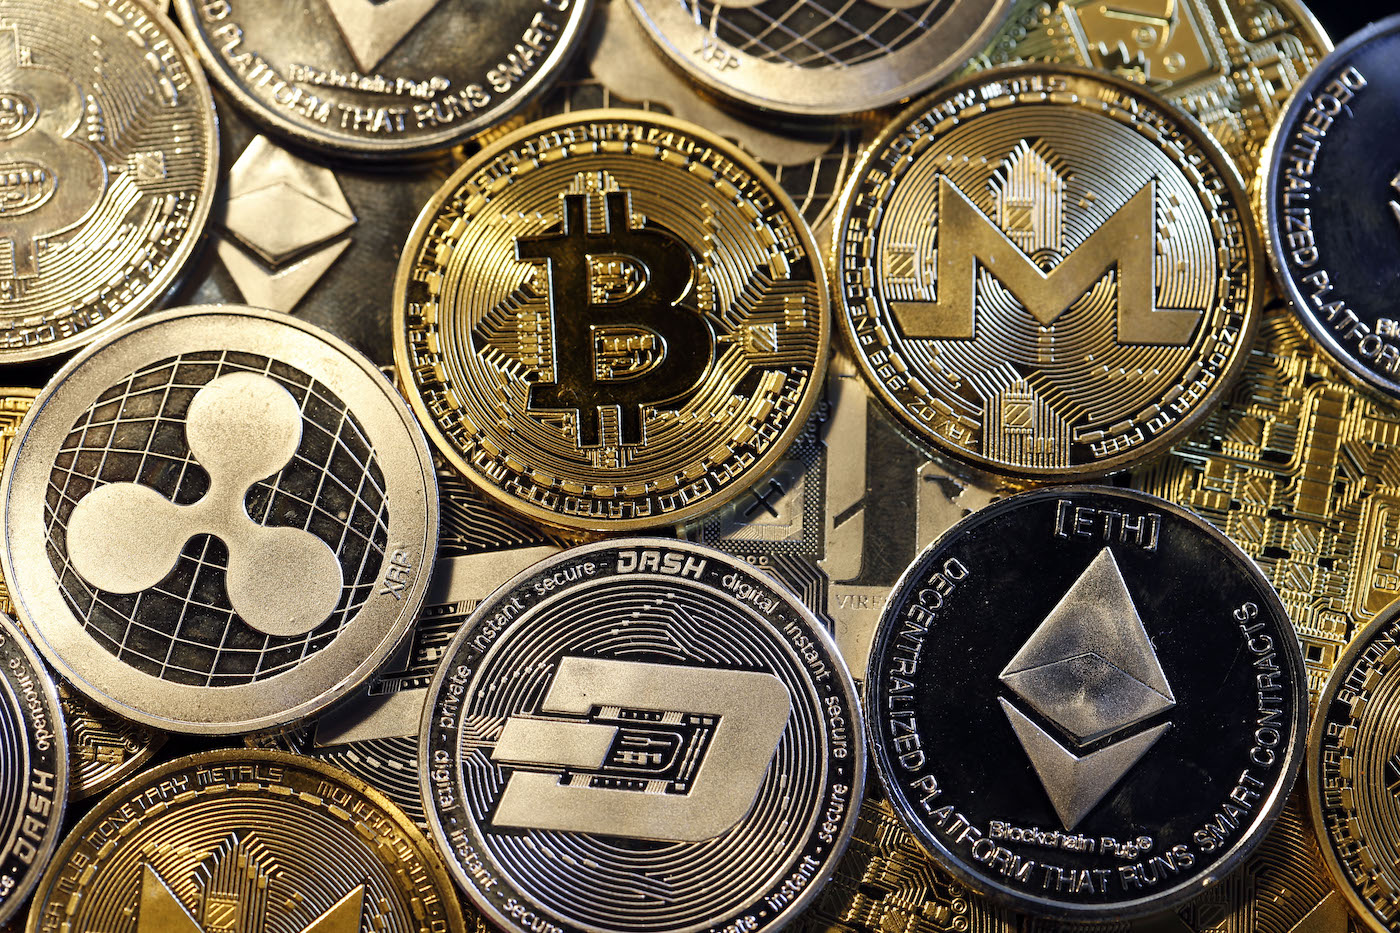 Most millennial millionaires own crypto assets and they plan to buy more in 2022